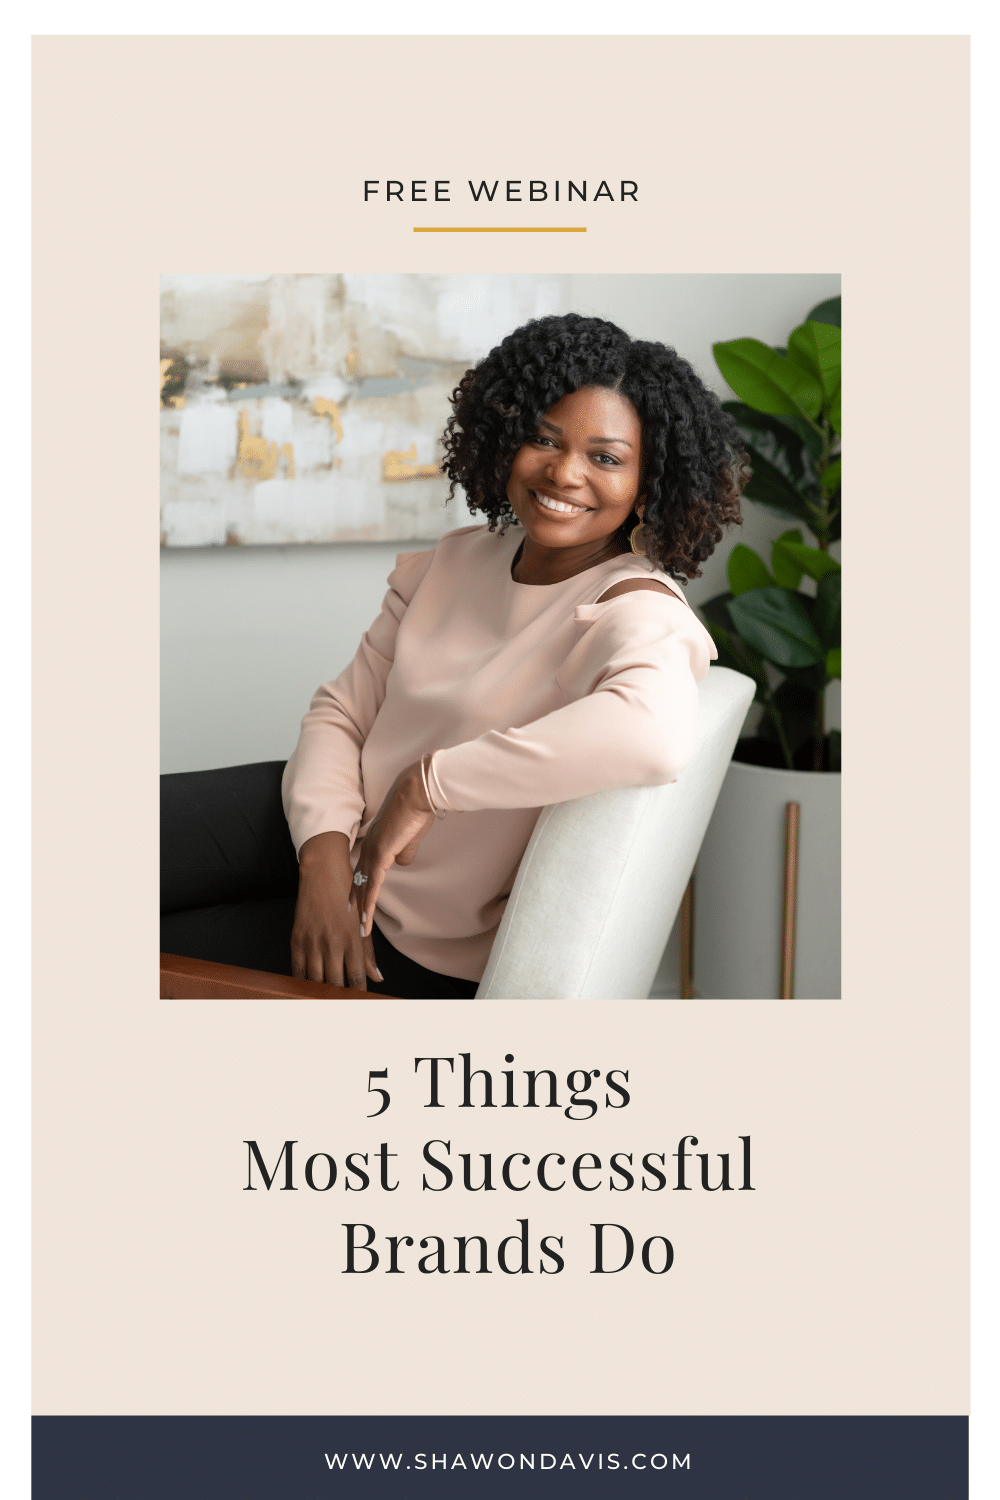 5 Things Most Successful Brands Do